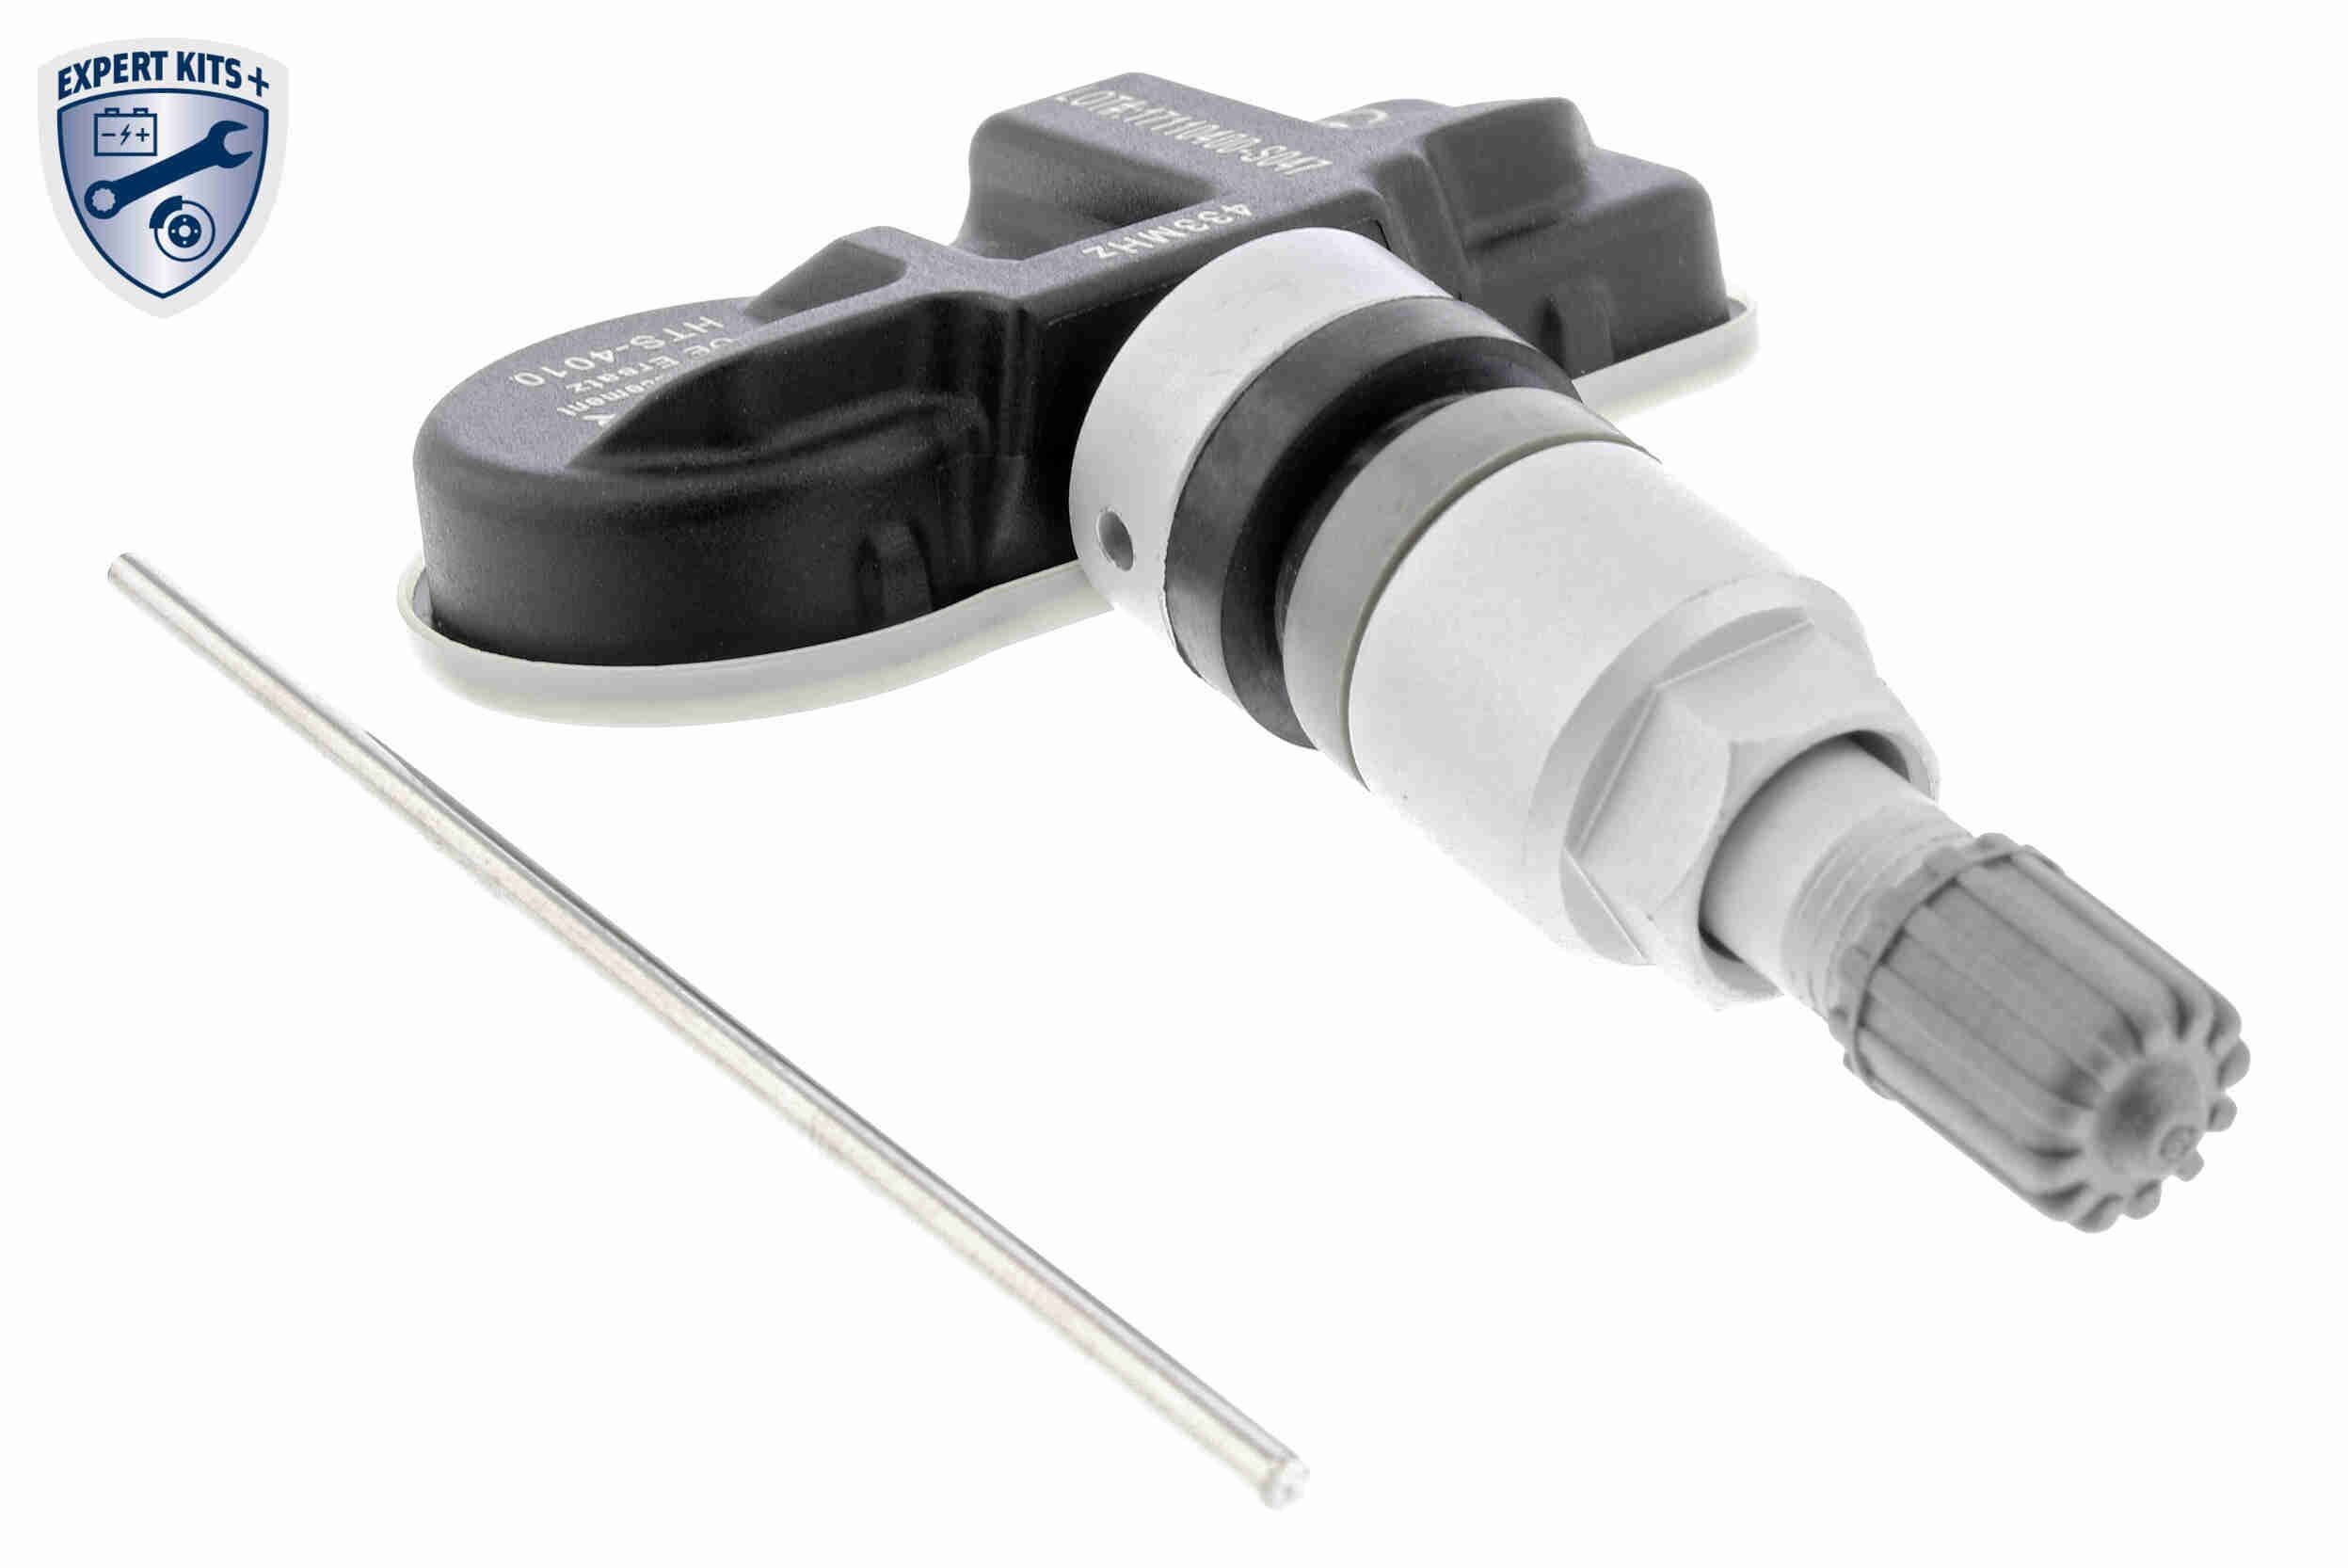 VEMO V10-72-0832 Tyre pressure sensor (TPMS) with mounting tool, with valves, with screw, EXPERT KITS +